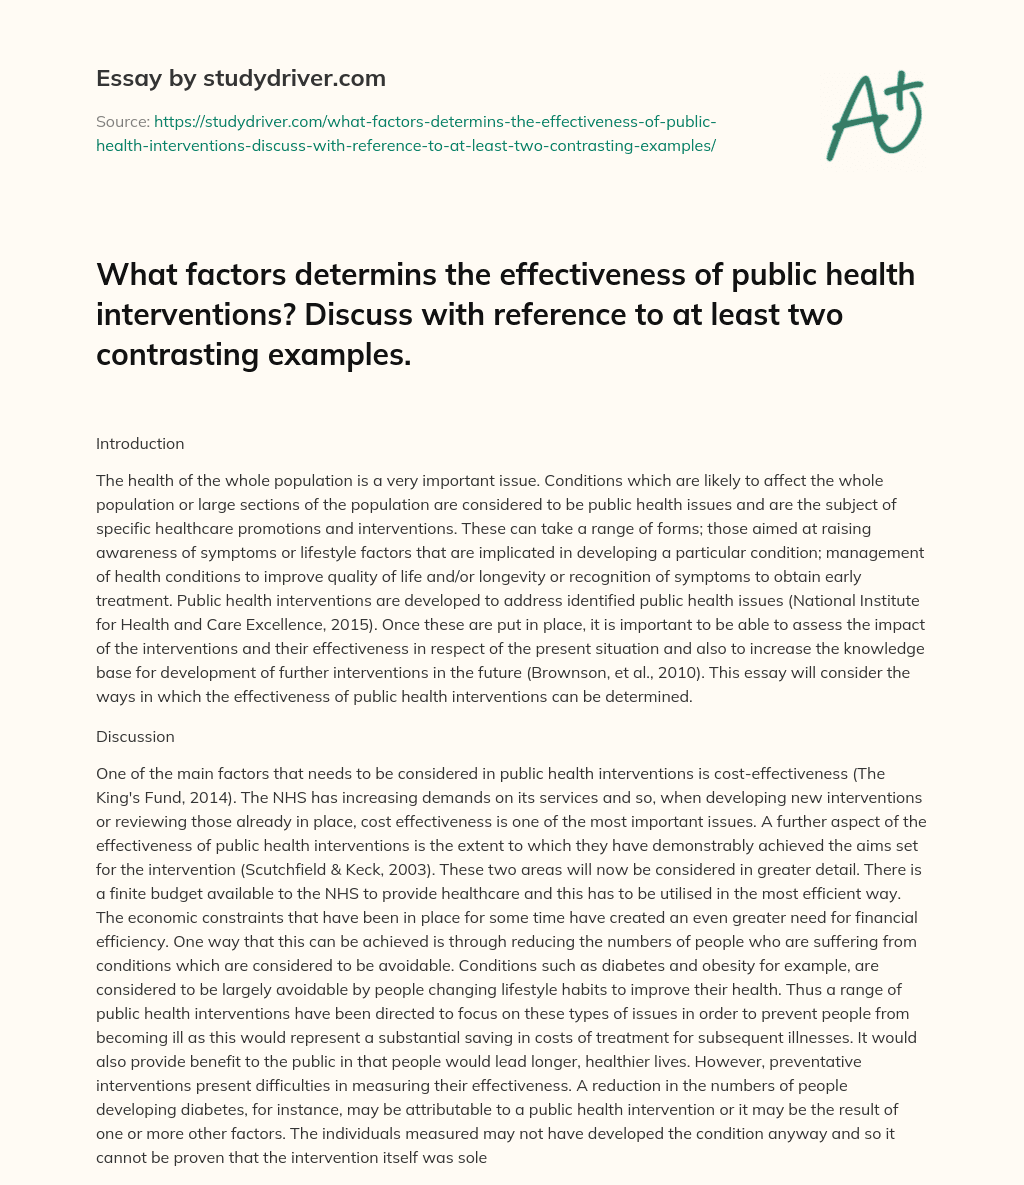 What Factors Determins the Effectiveness of Public Health Interventions? Discuss with Reference to at Least Two Contrasting Examples. essay